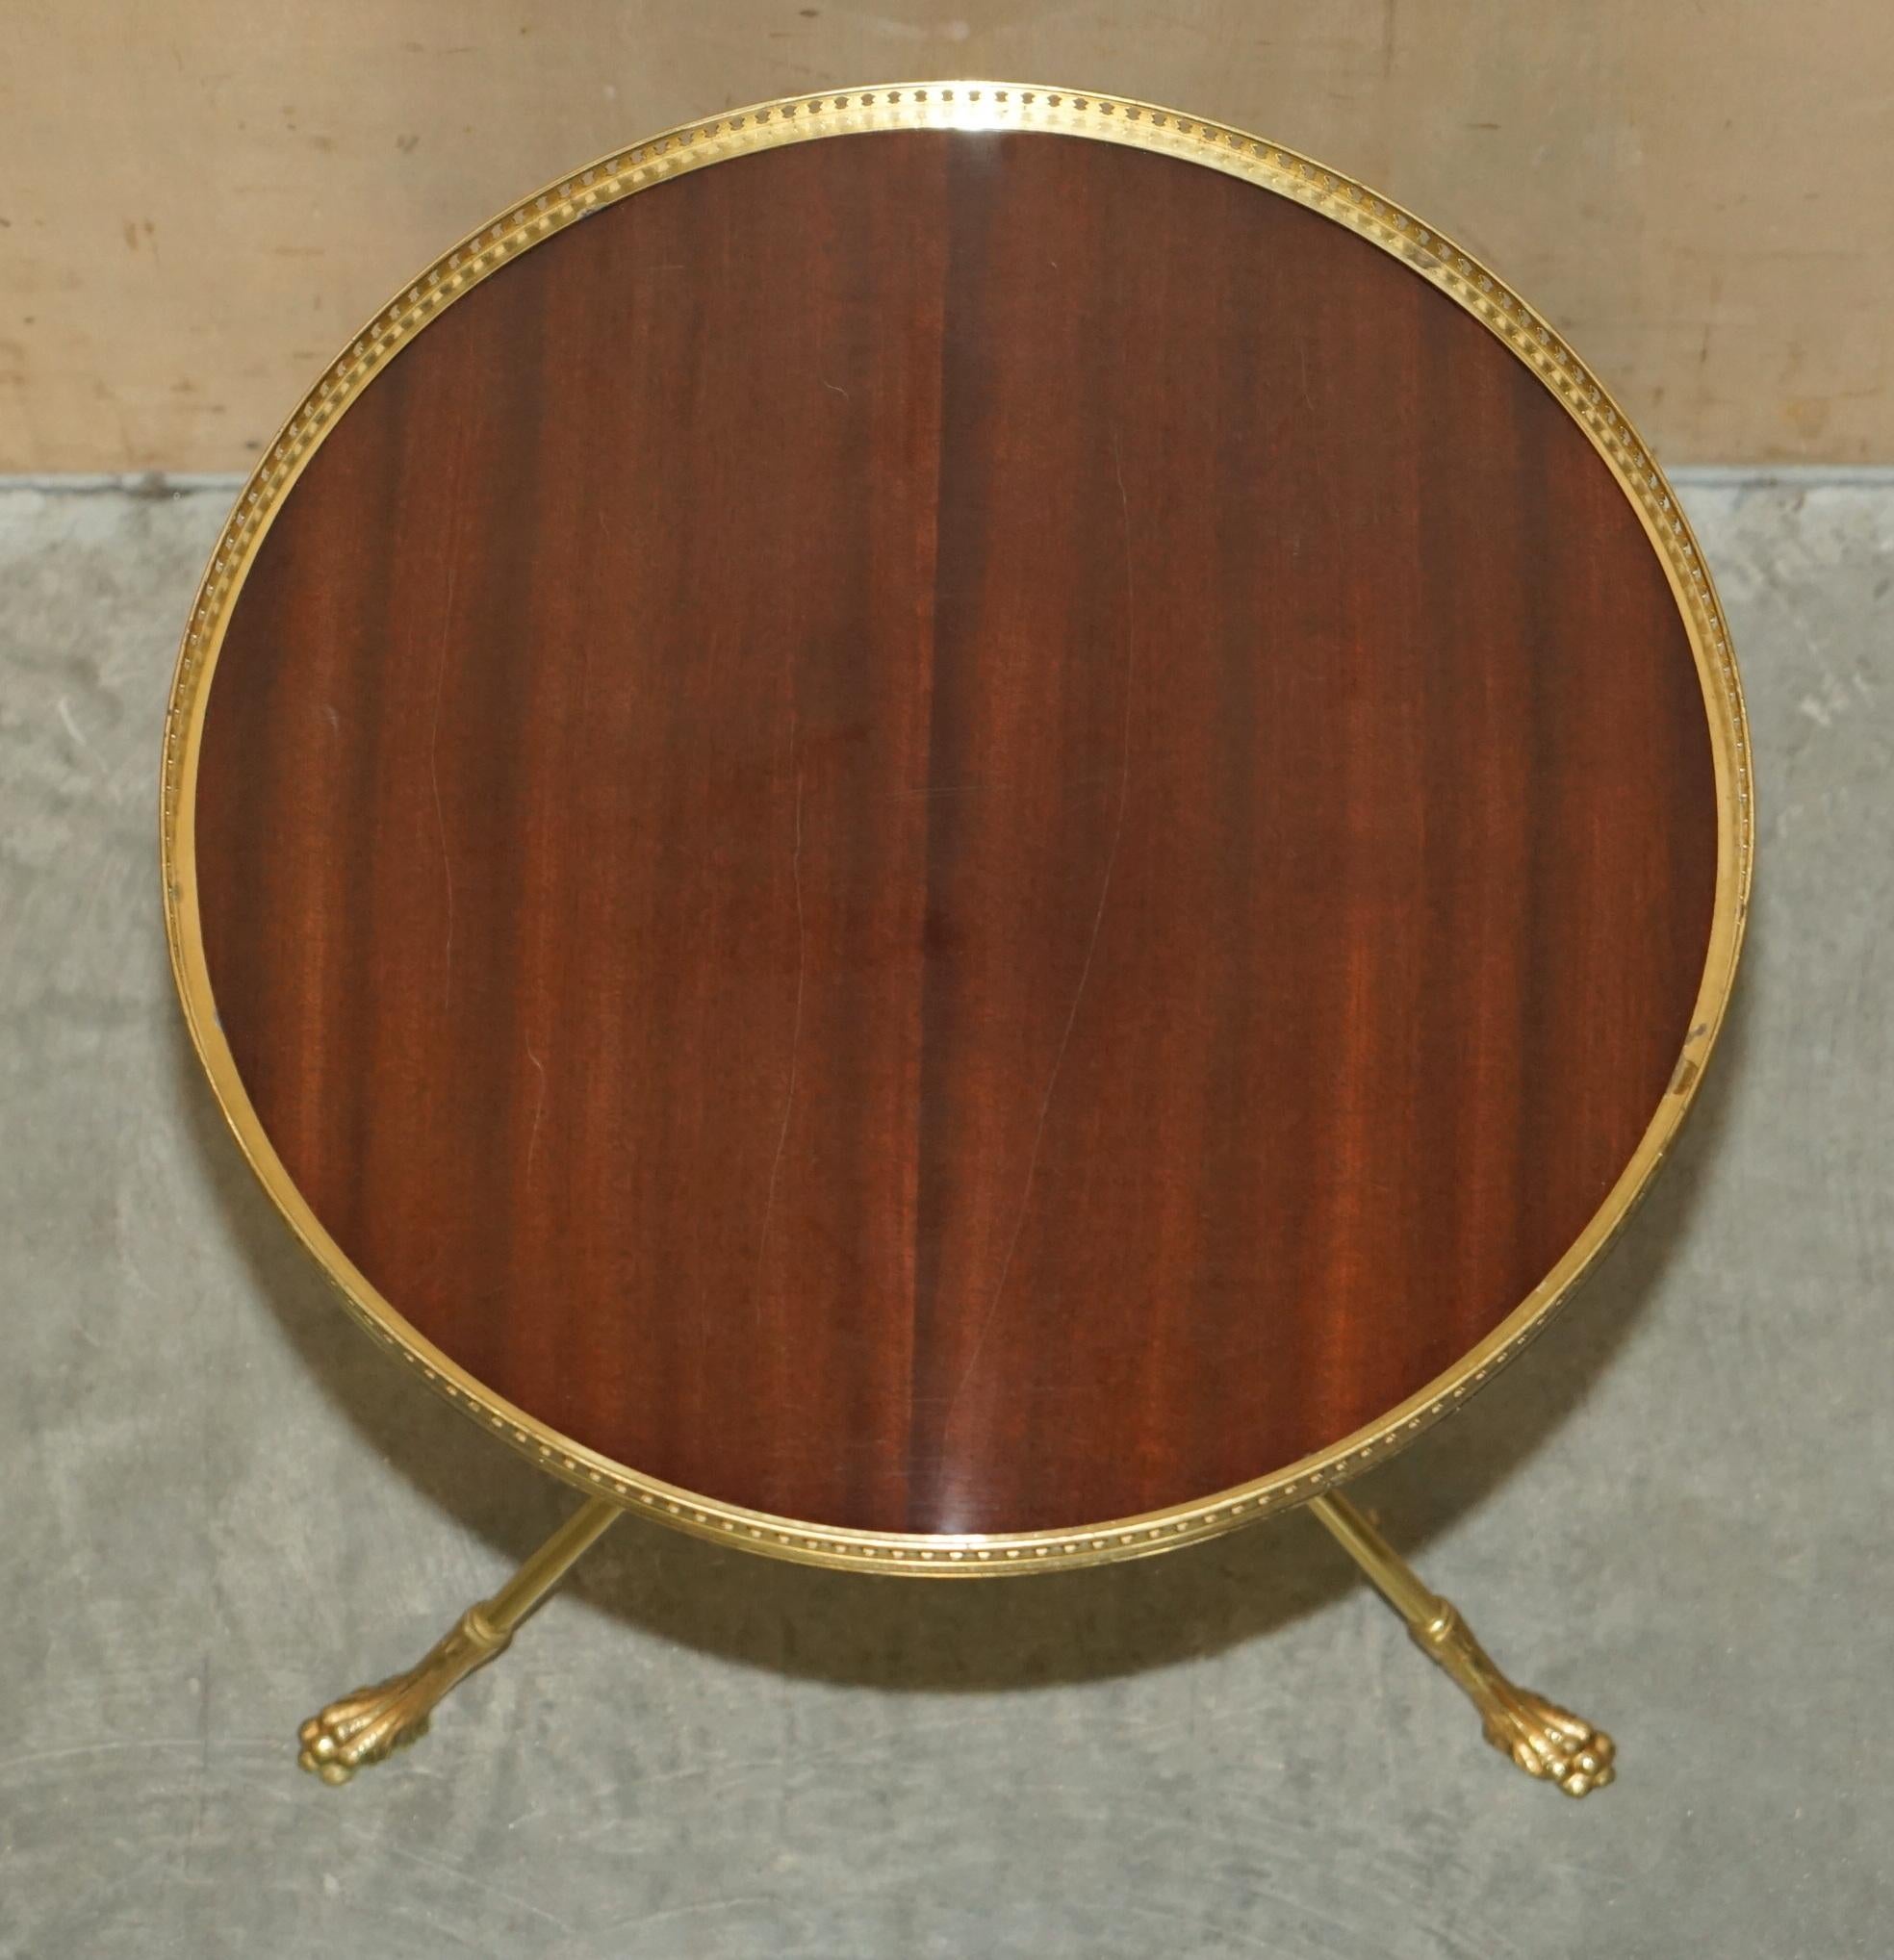 HIGHLY COLLECTABLE MiD CENTURY MODERN MAISON BAGUES GUERIDON OCCASIONAL TABLE For Sale 3